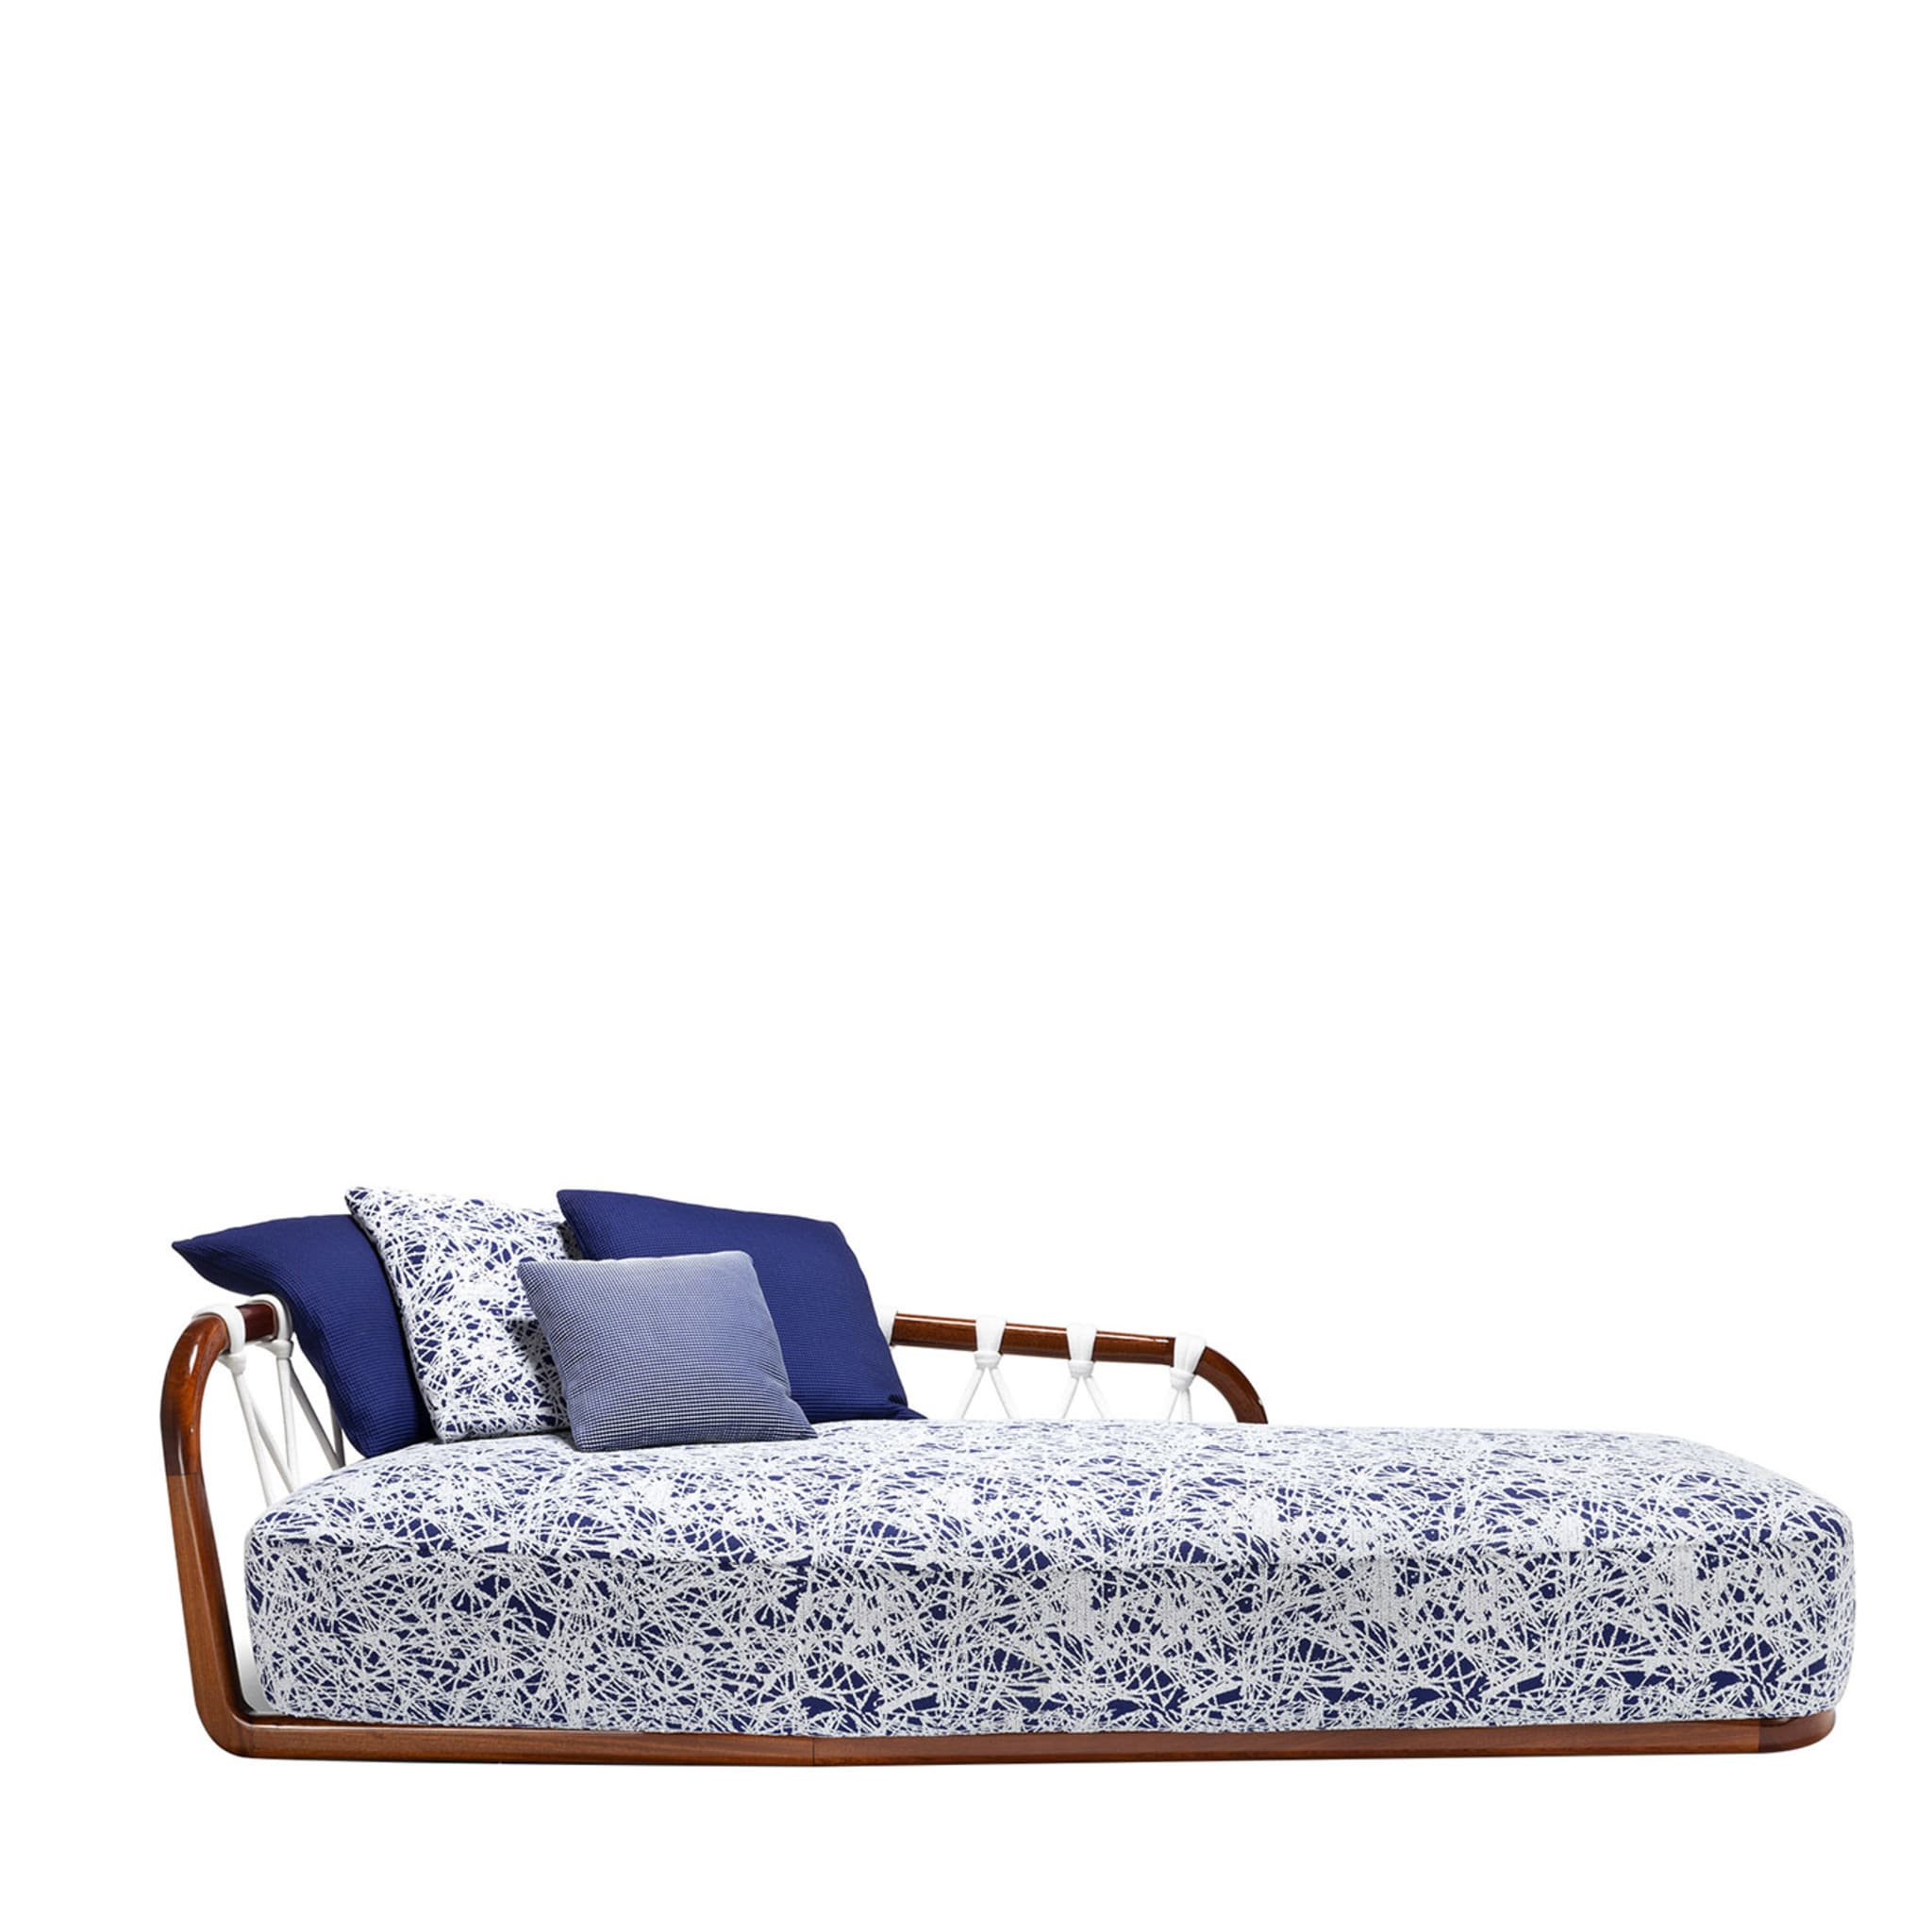 Sunset Basket Blue & White End Element by Paola Navone & AMP - Main view